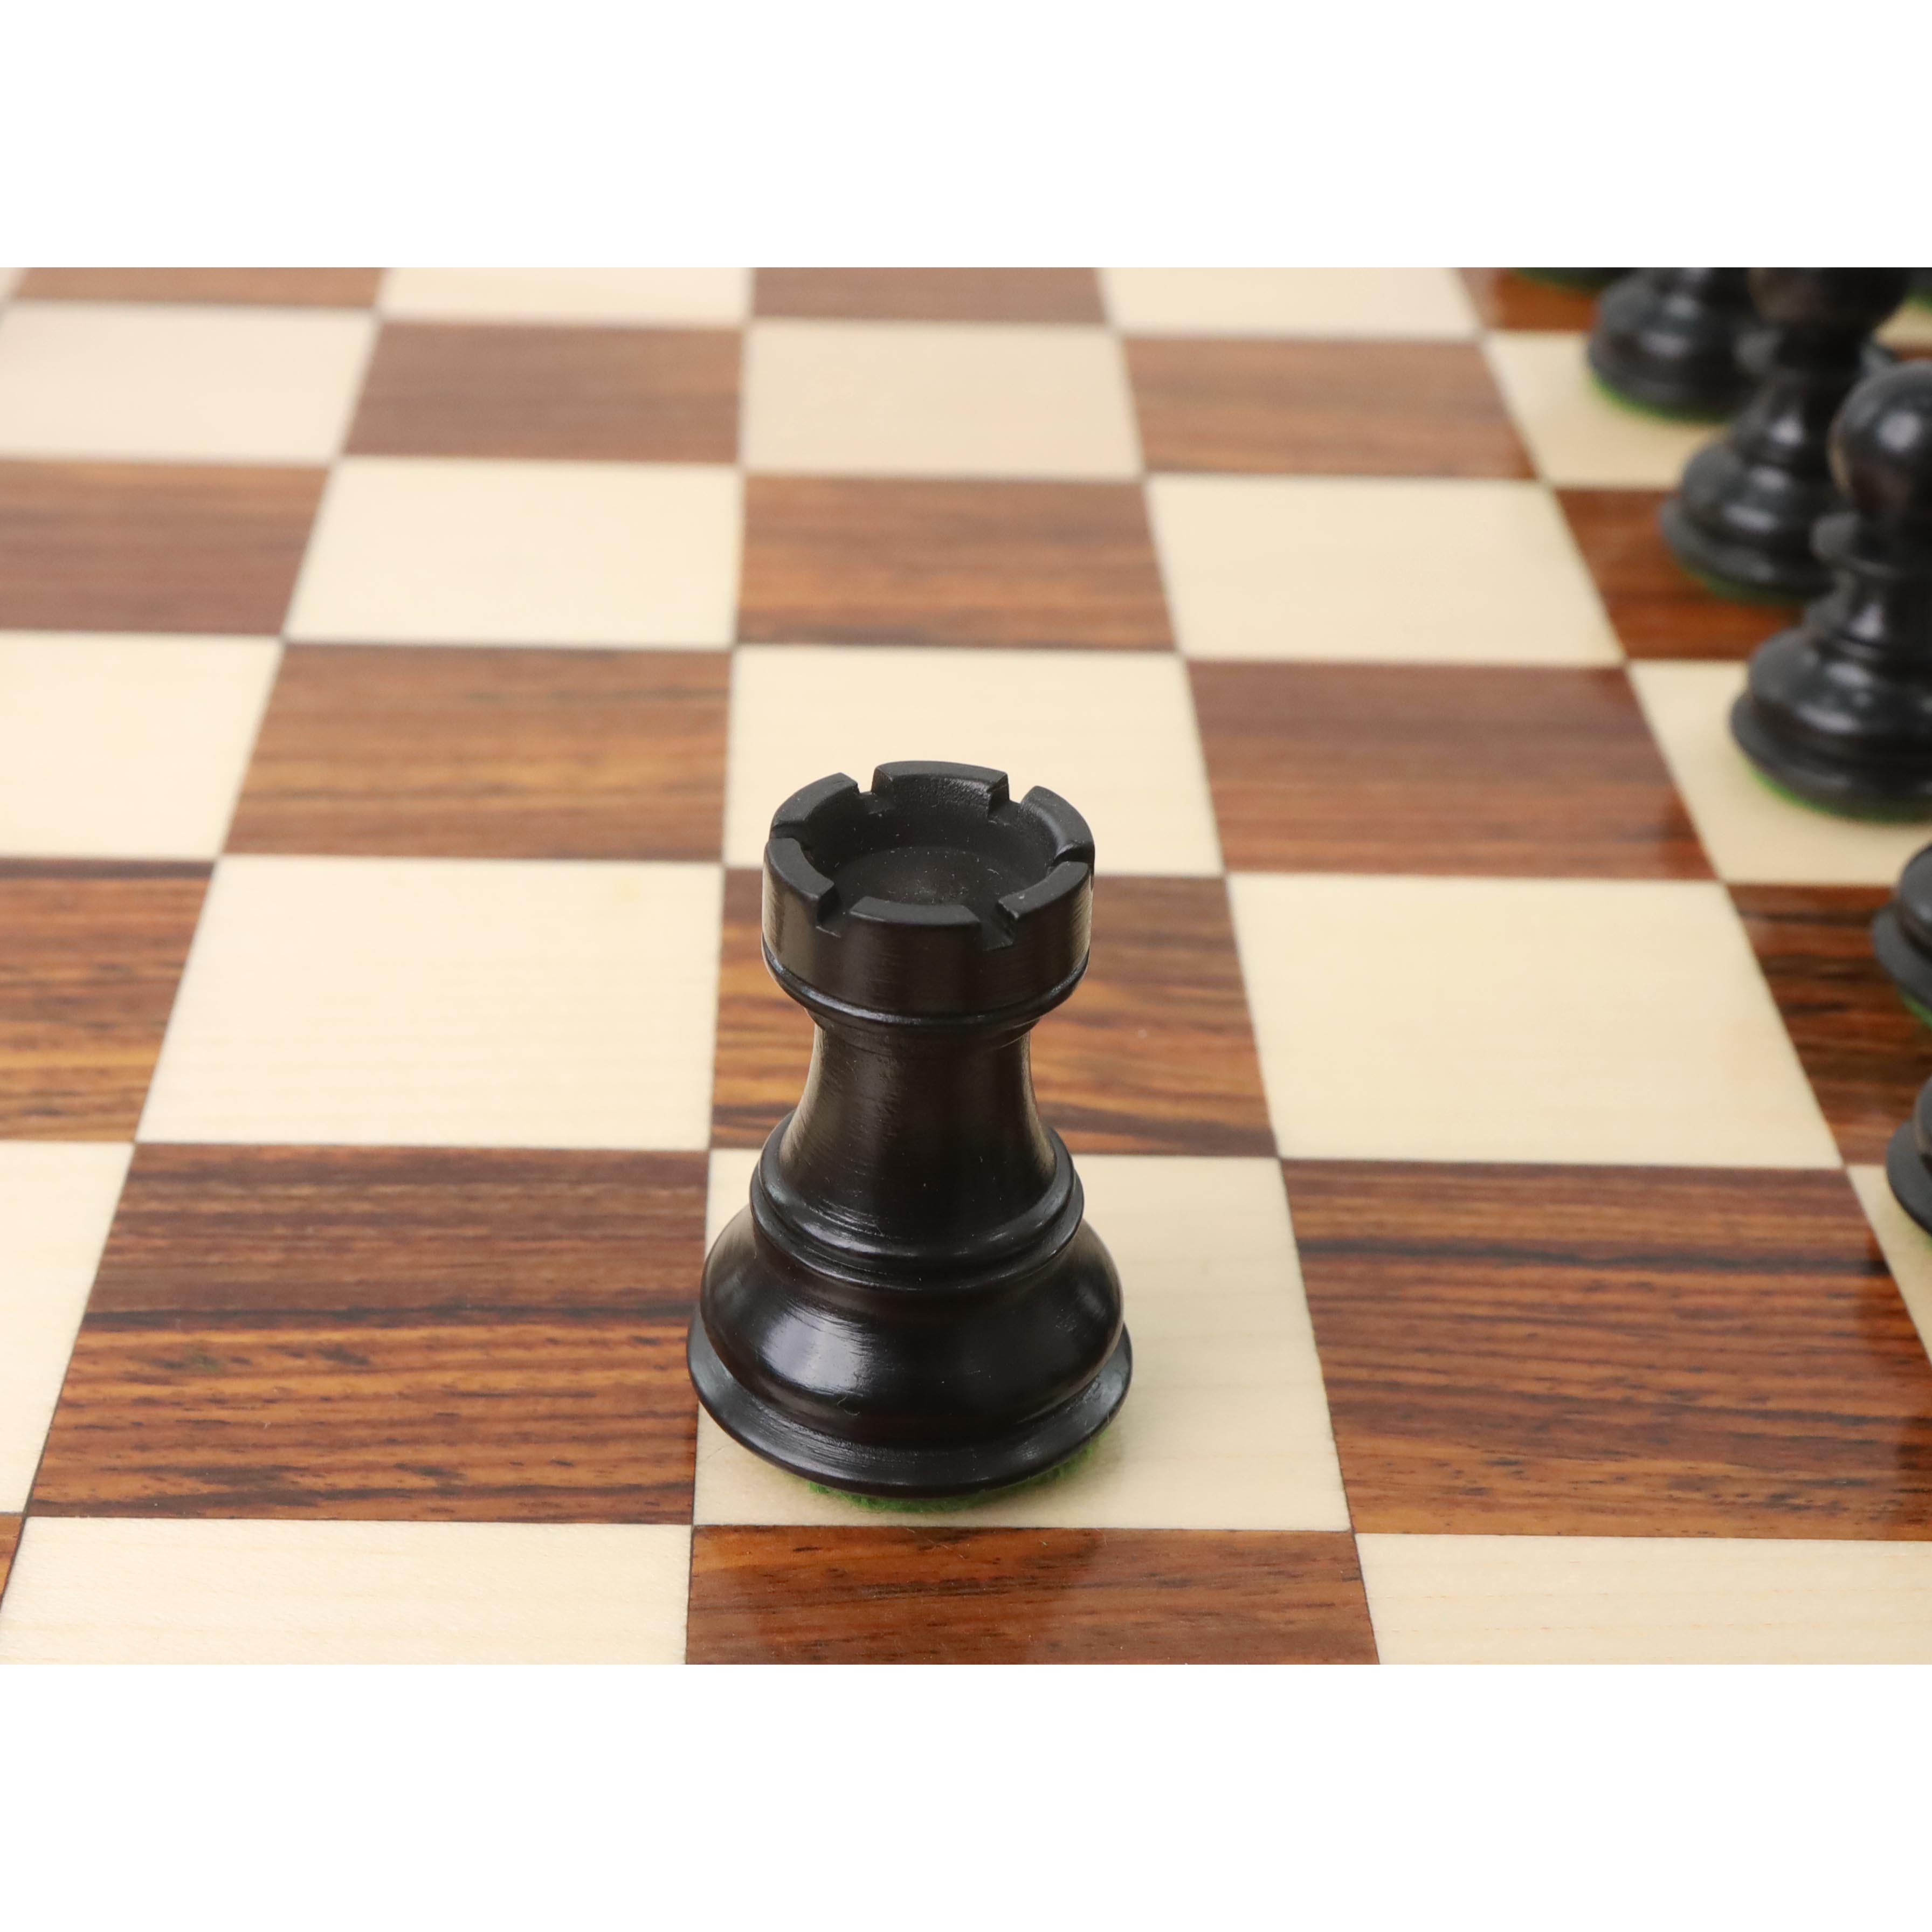 2.6″ Russian Zagreb Chess Pieces Only set – Weighted Ebonised Boxwood